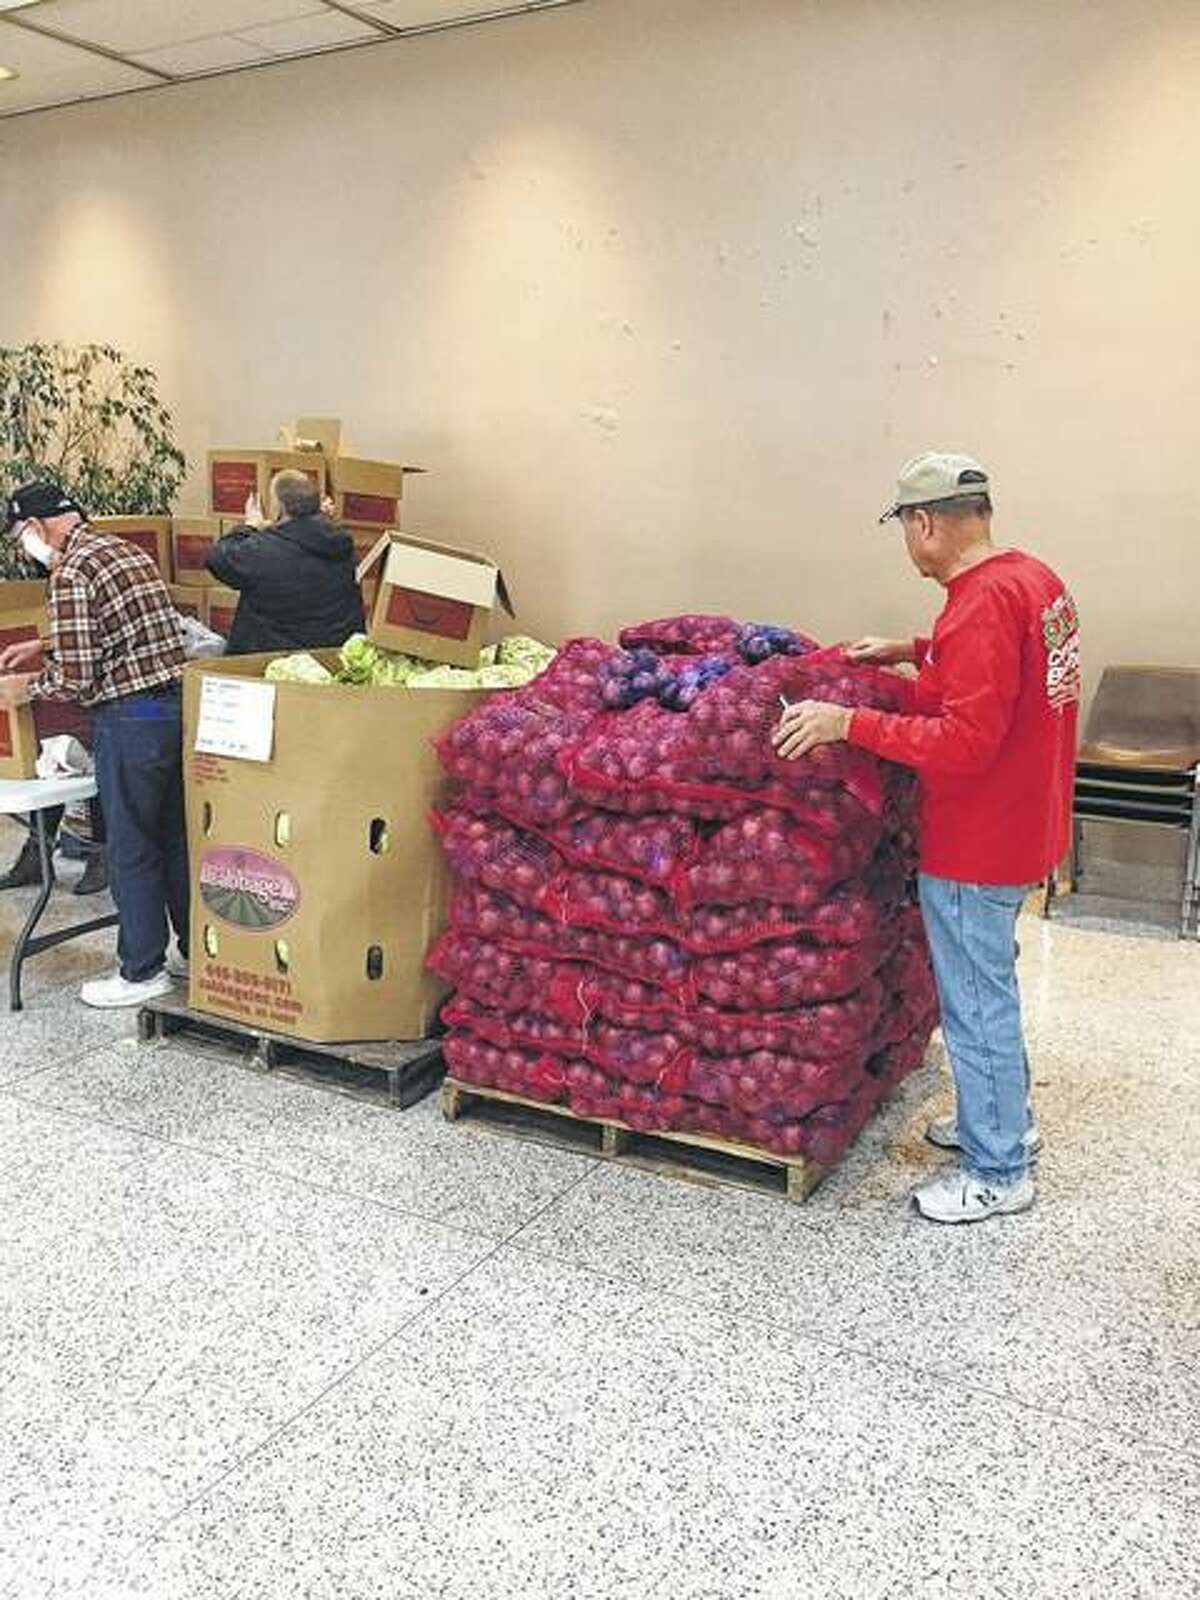 Volunteers help sort loads of potatoes, cabbage and other food items.